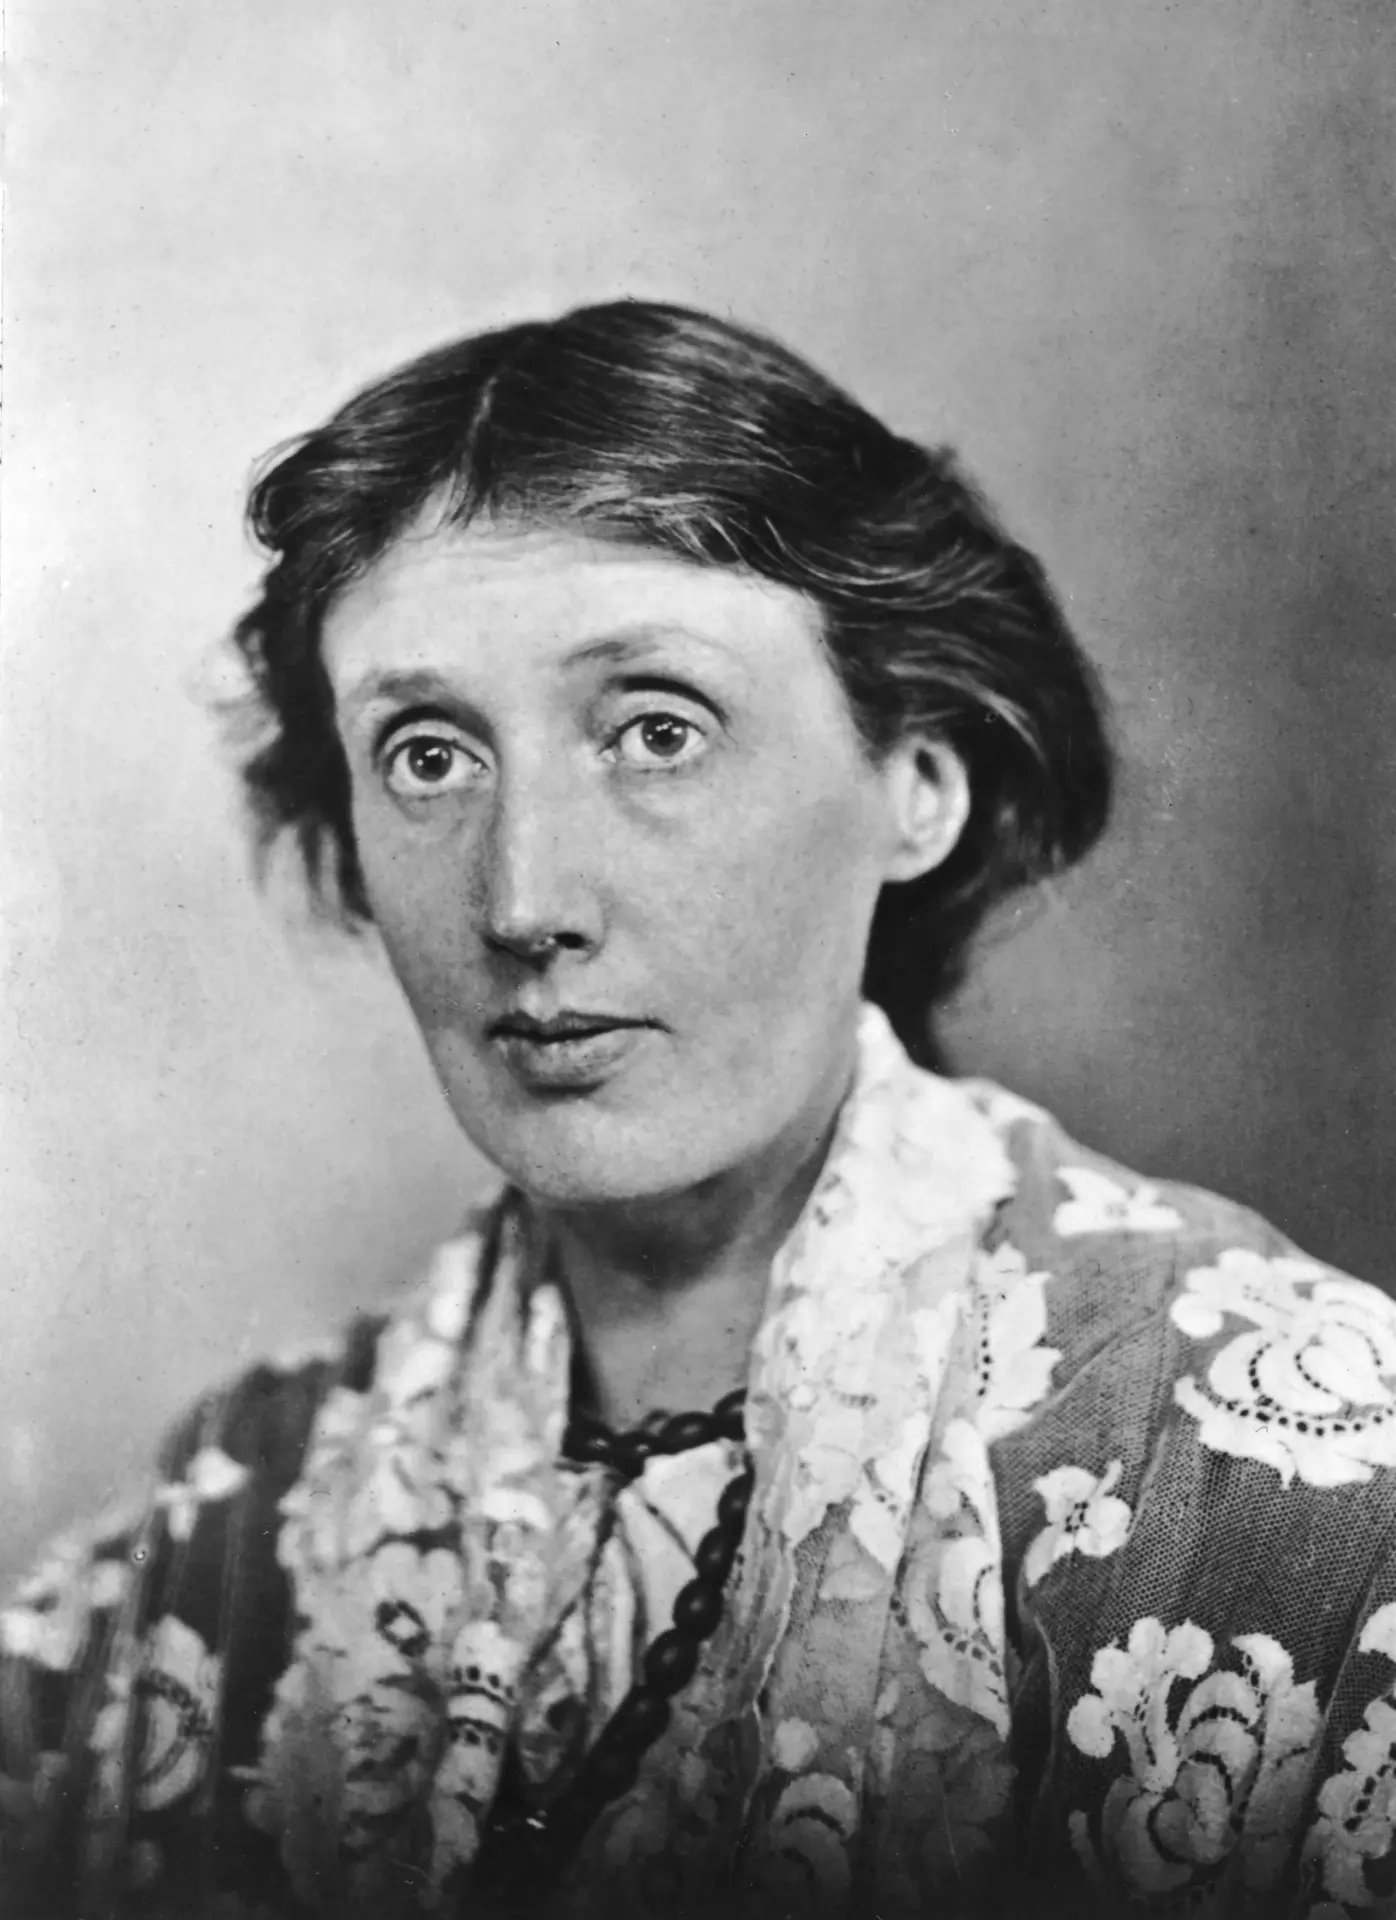 Virginia Woolf received multiple awards and achievements